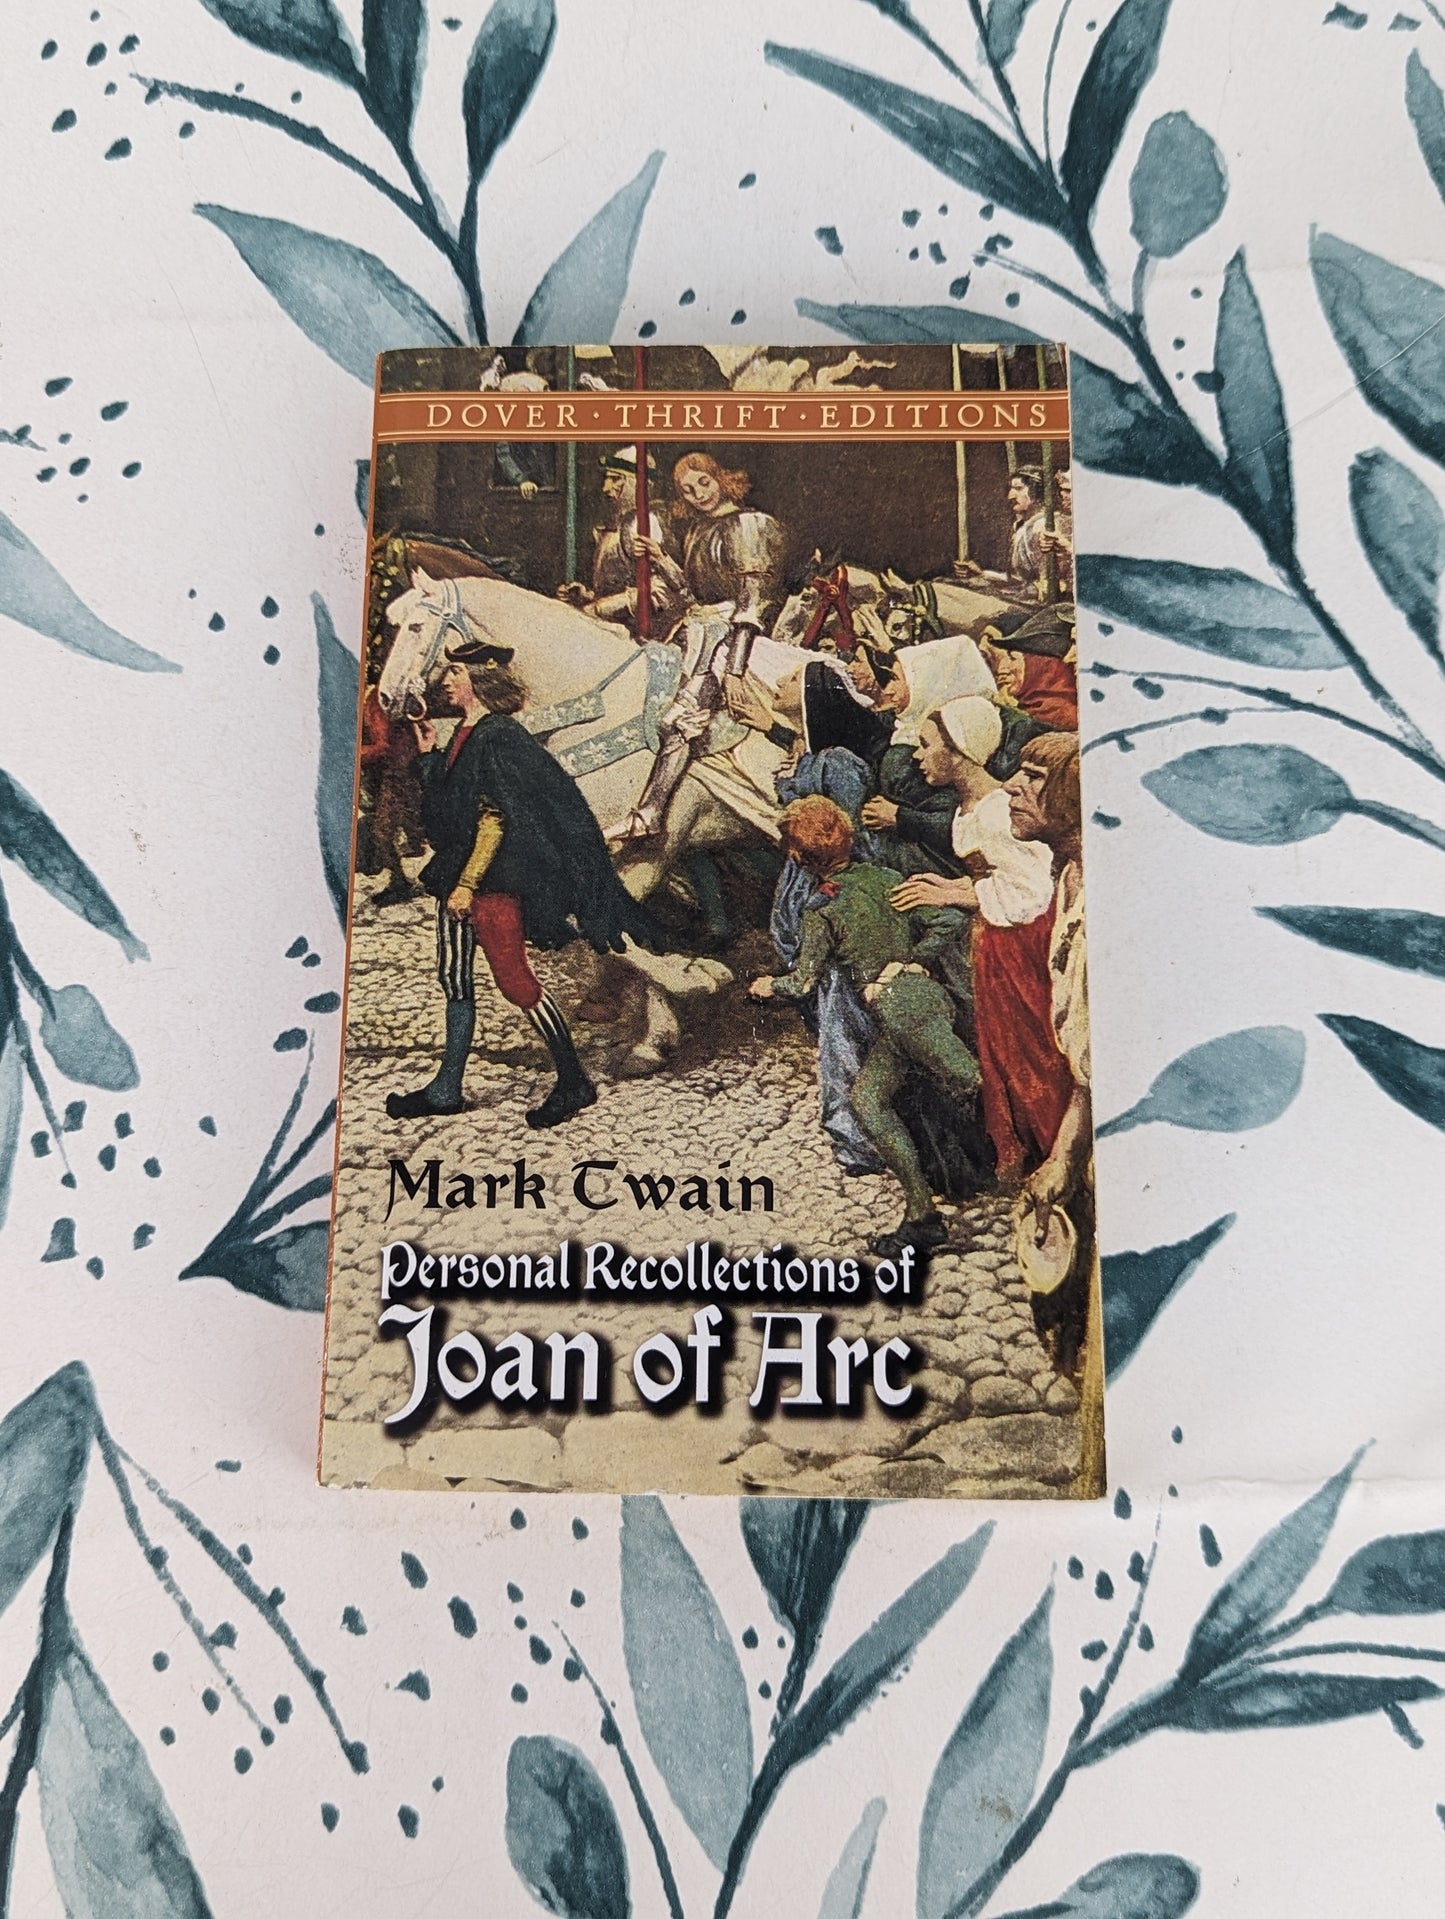 Personal Recollections of Joan of Arc (by Mark Twain)